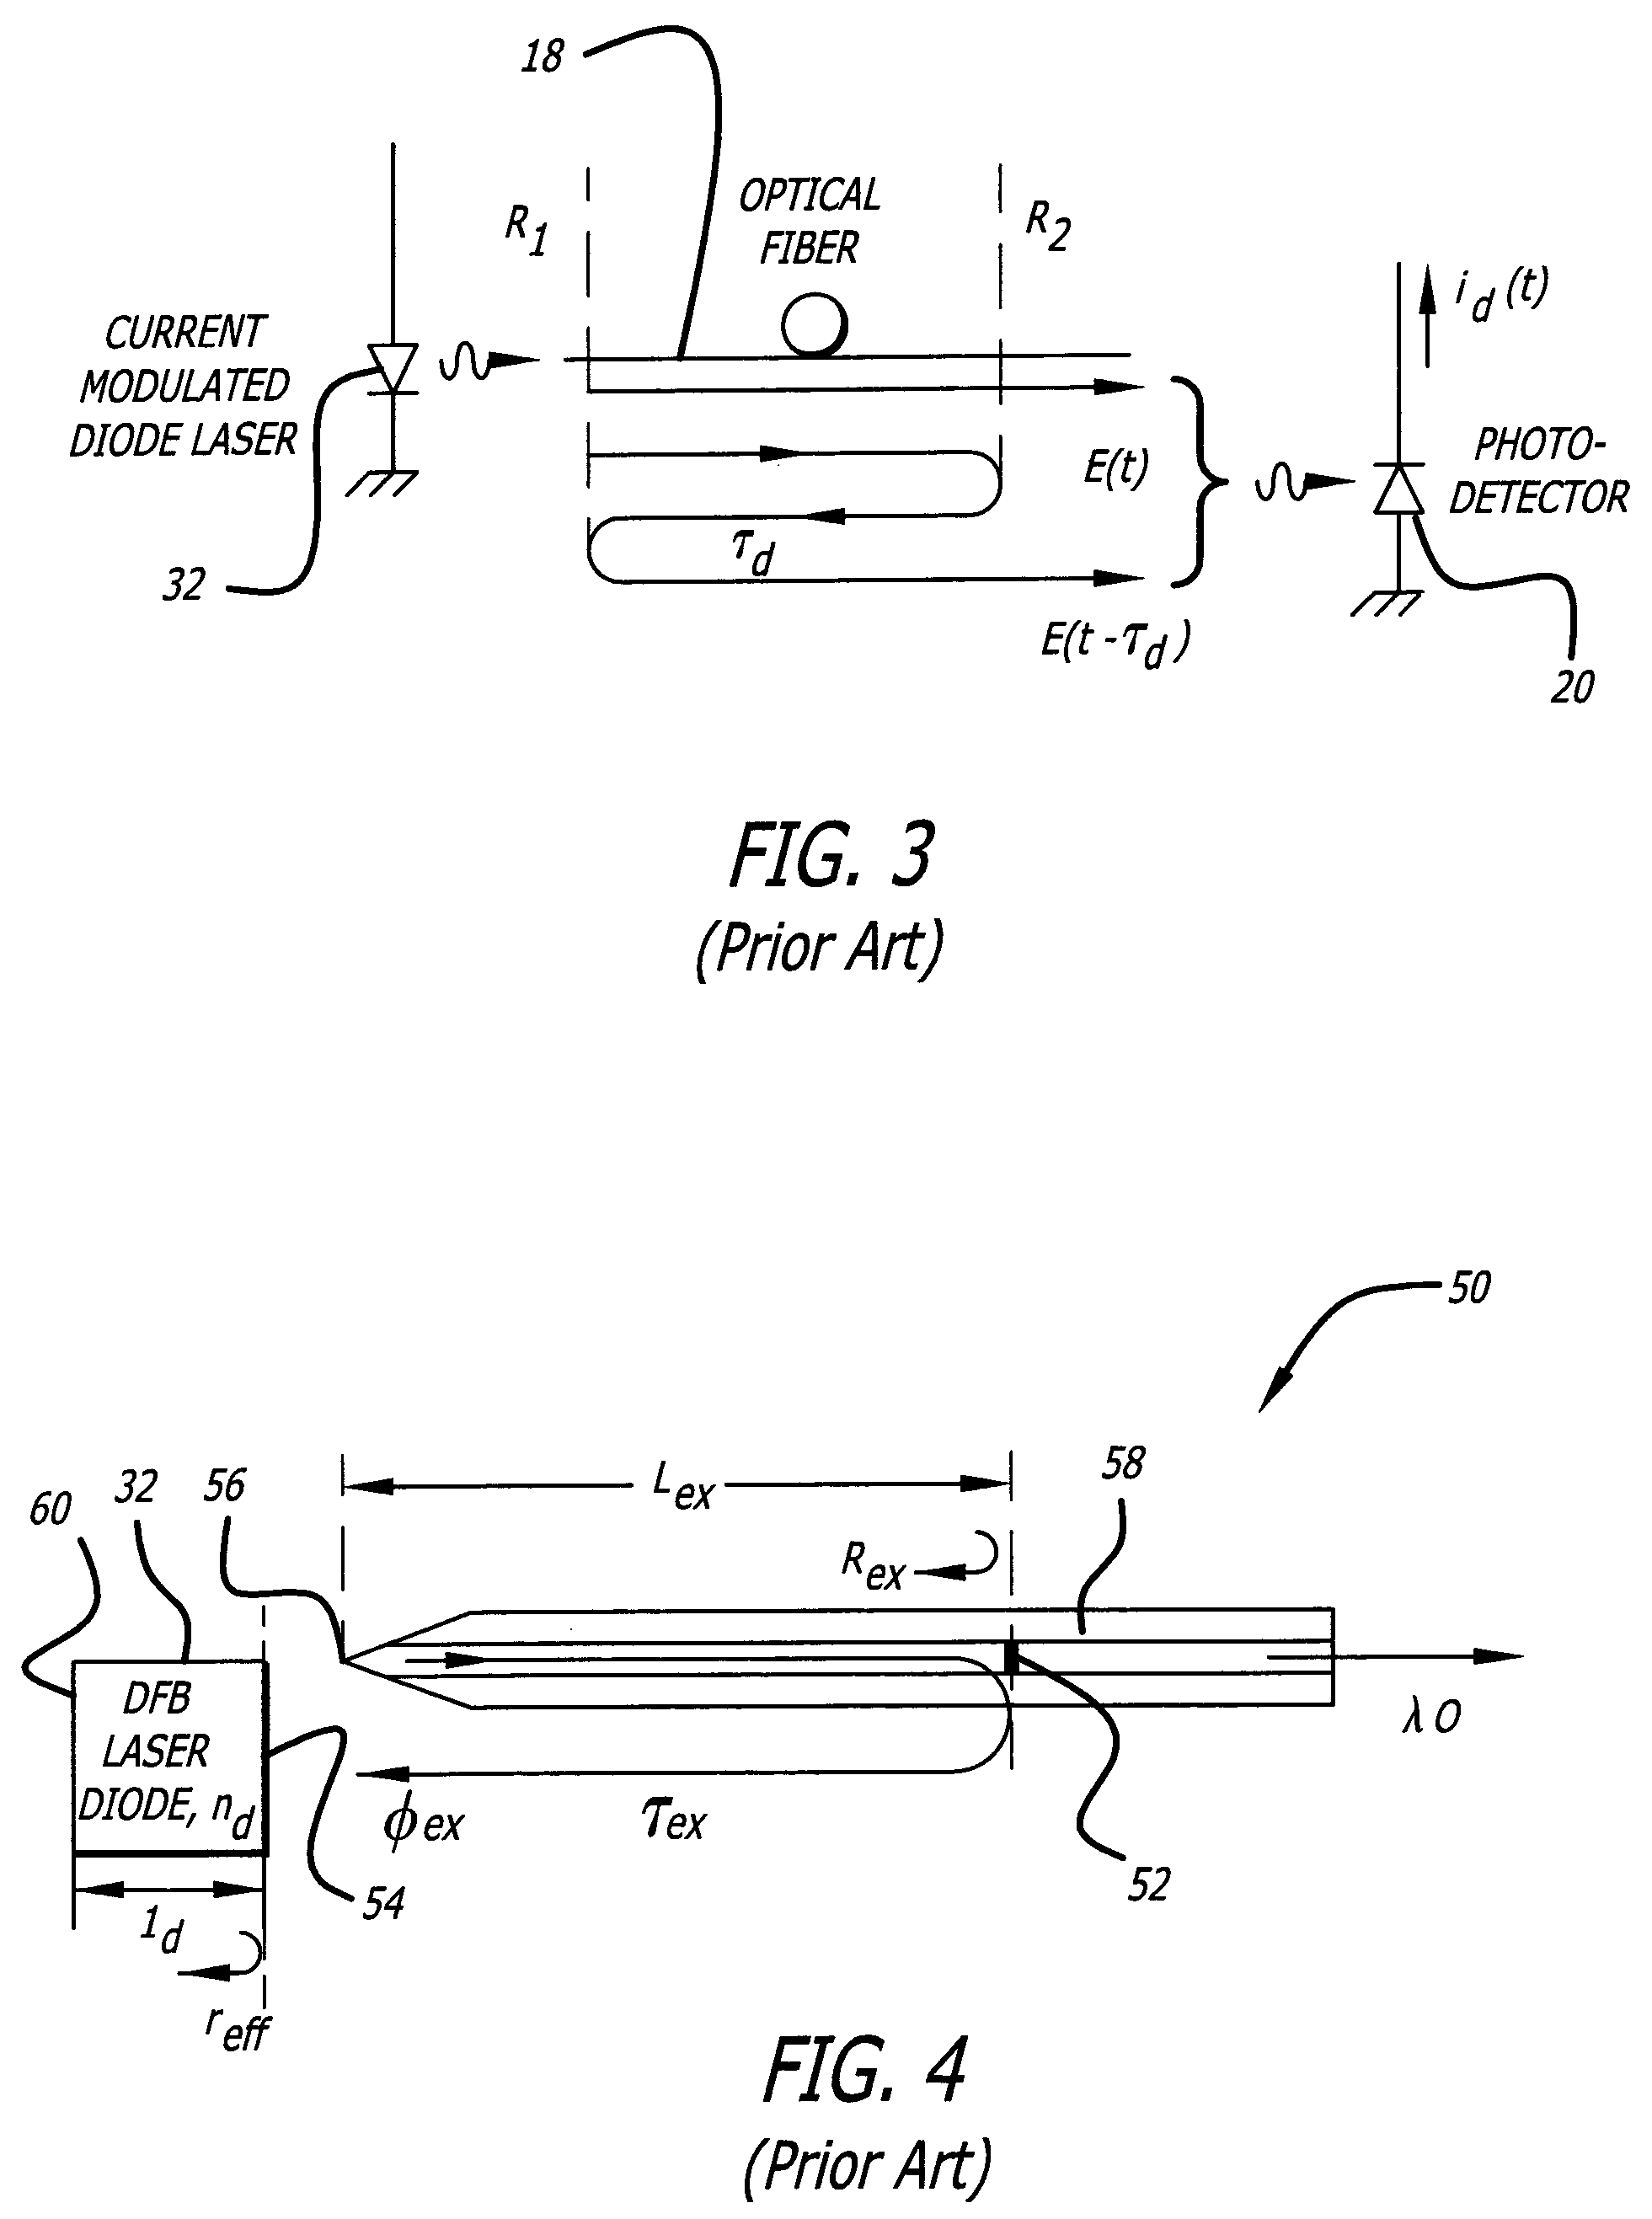 System and method for reducing interferometric distortion and relative intensity noise in directly modulated fiber optic links